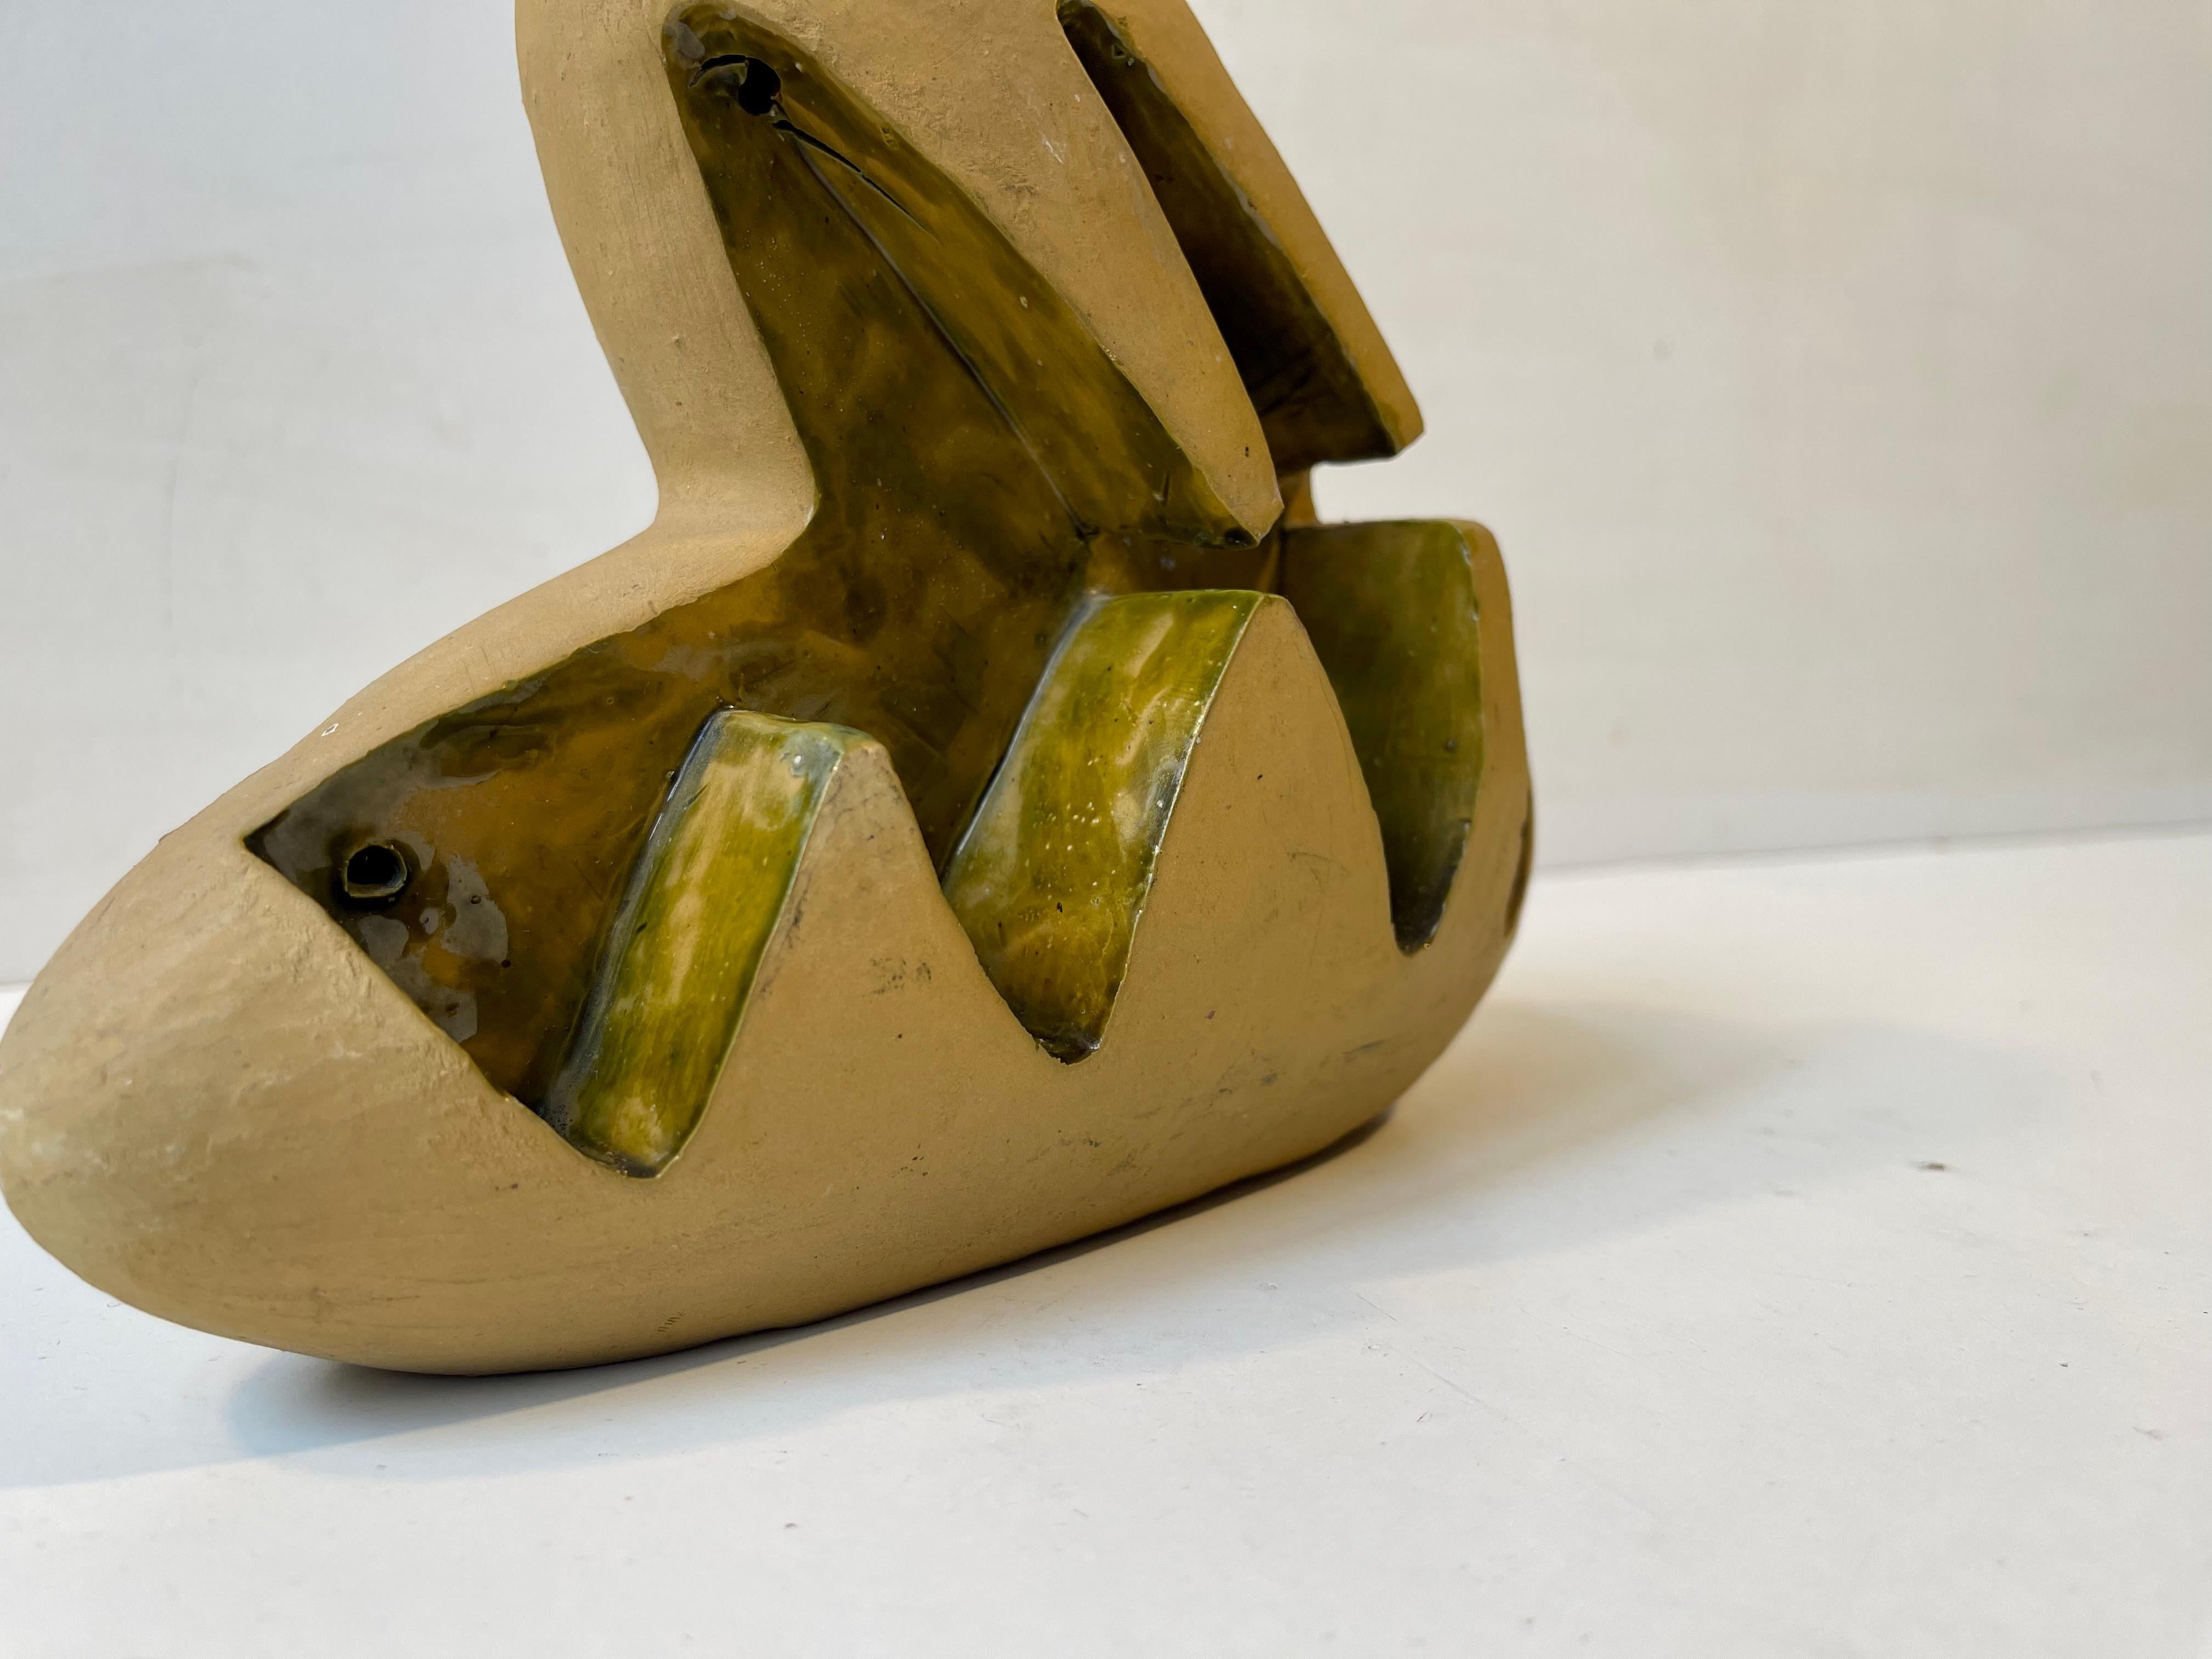 Mid-20th Century Abstract Form - Surrealist Entity in Glazed Ceramic, 1960s For Sale